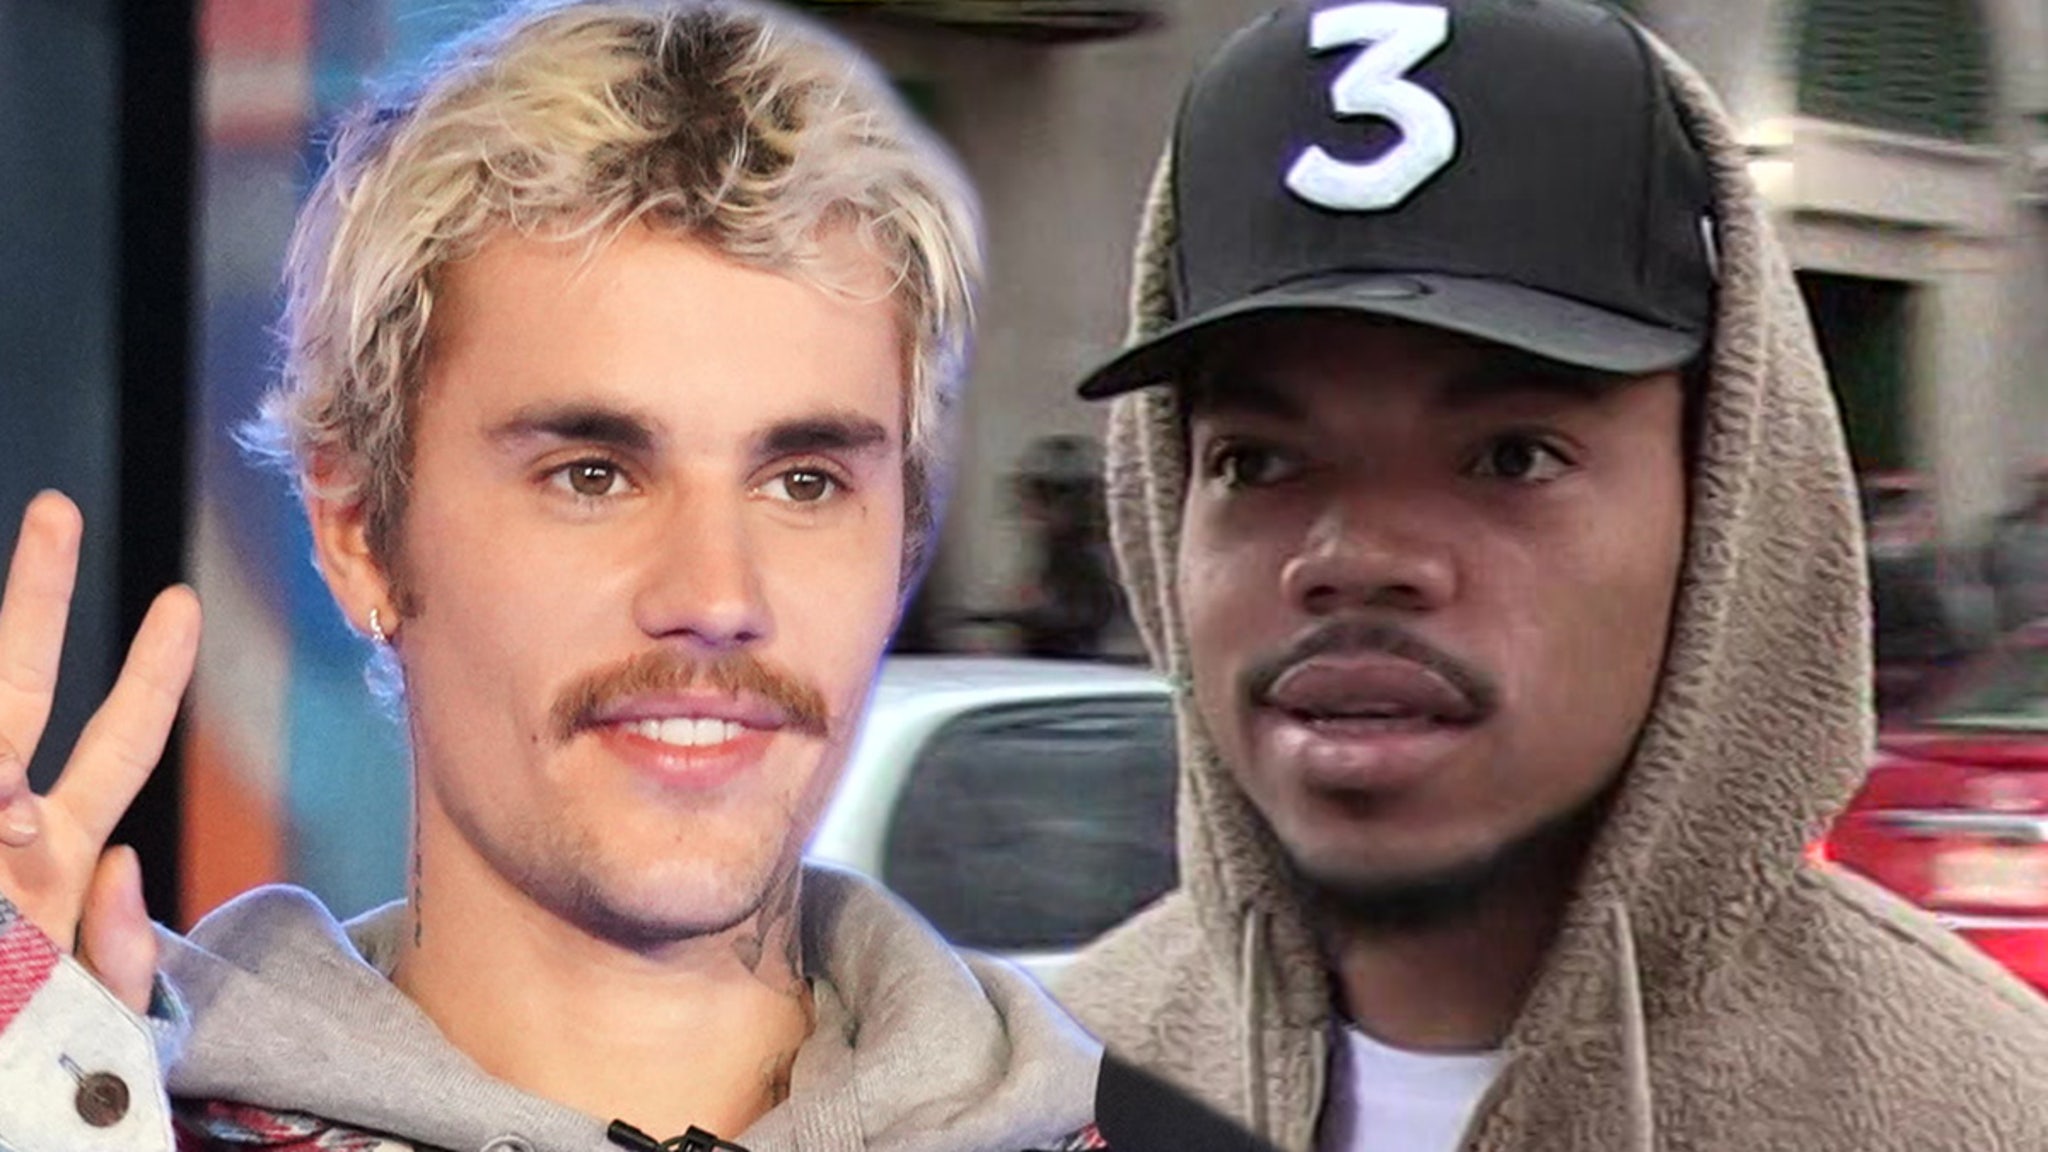 Justin Bieber and Chance the Rapper Giving Away $250k to People Struggling - TMZ